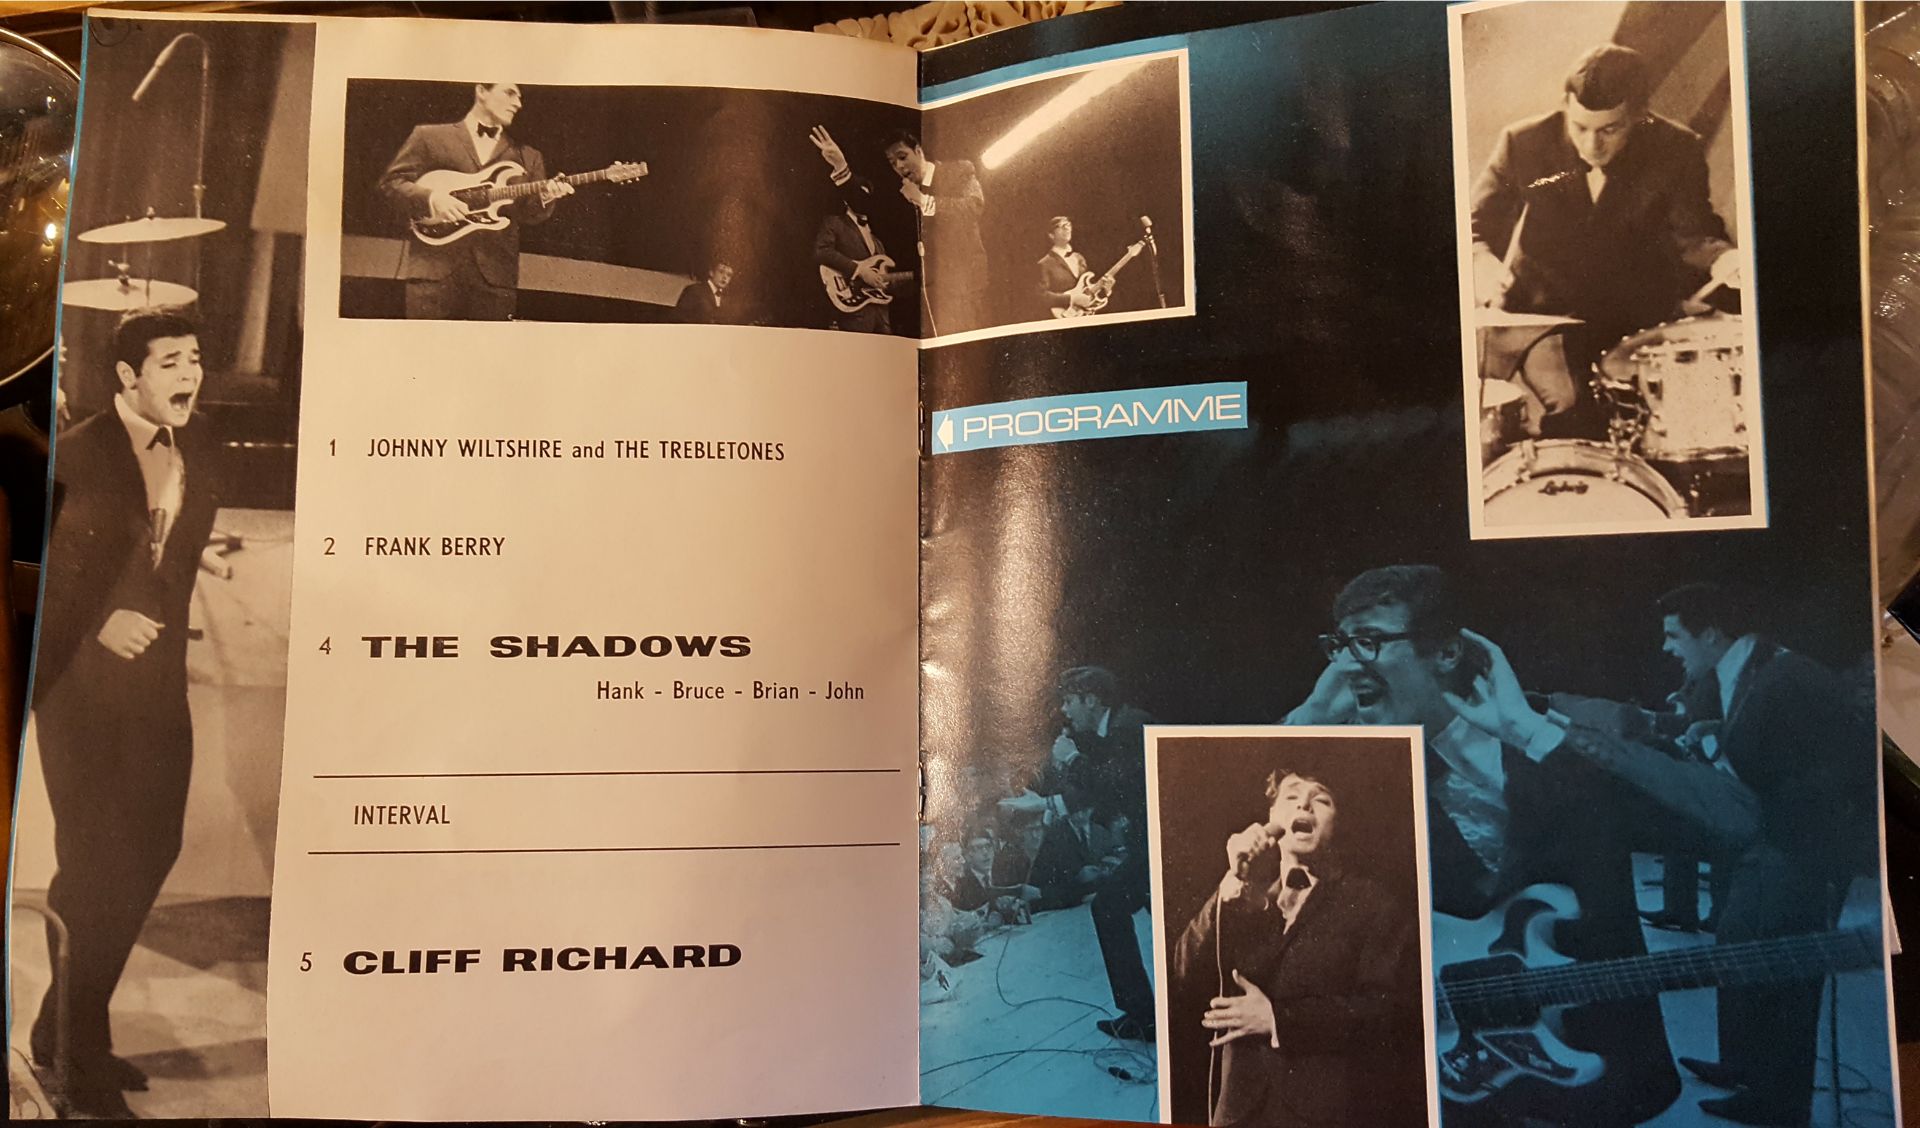 Cliff Richard 1960's Programme - Image 4 of 4